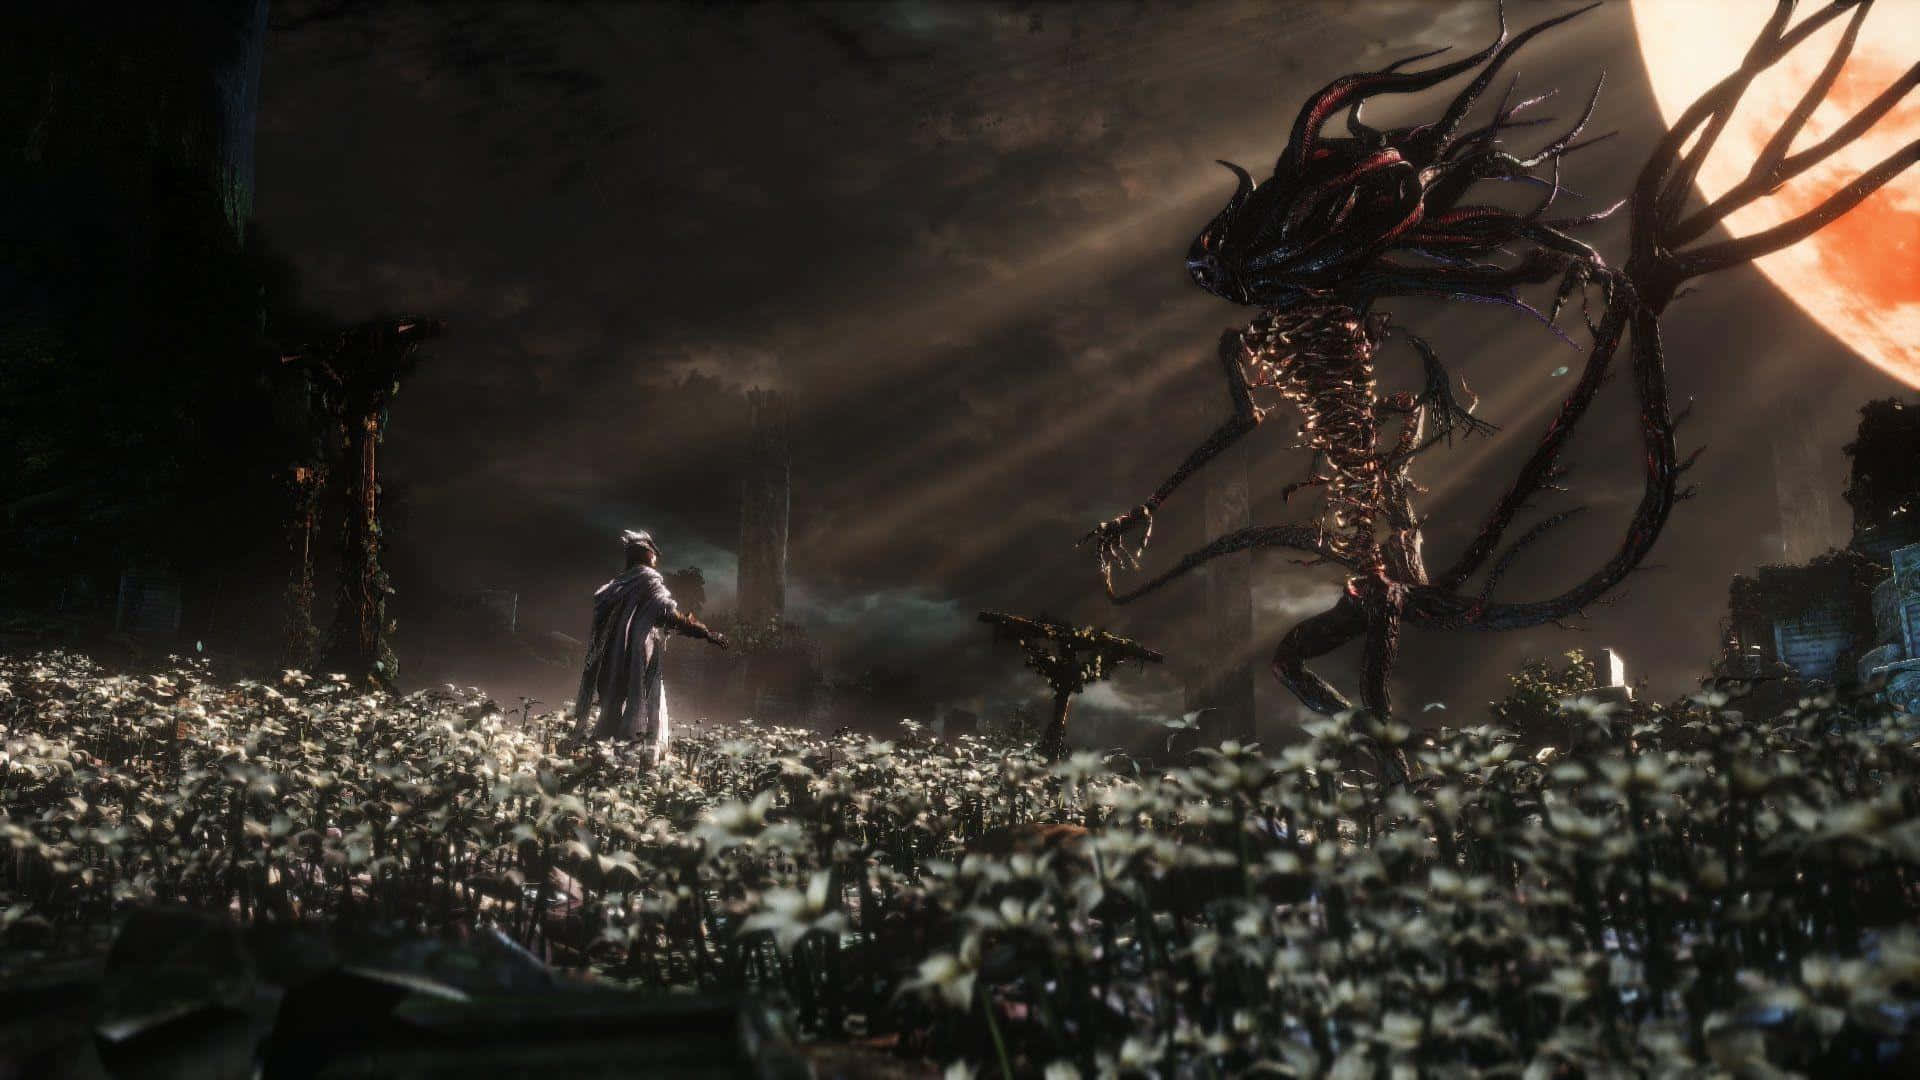 Hunter confronting beast in the dark and haunting world of Bloodborne